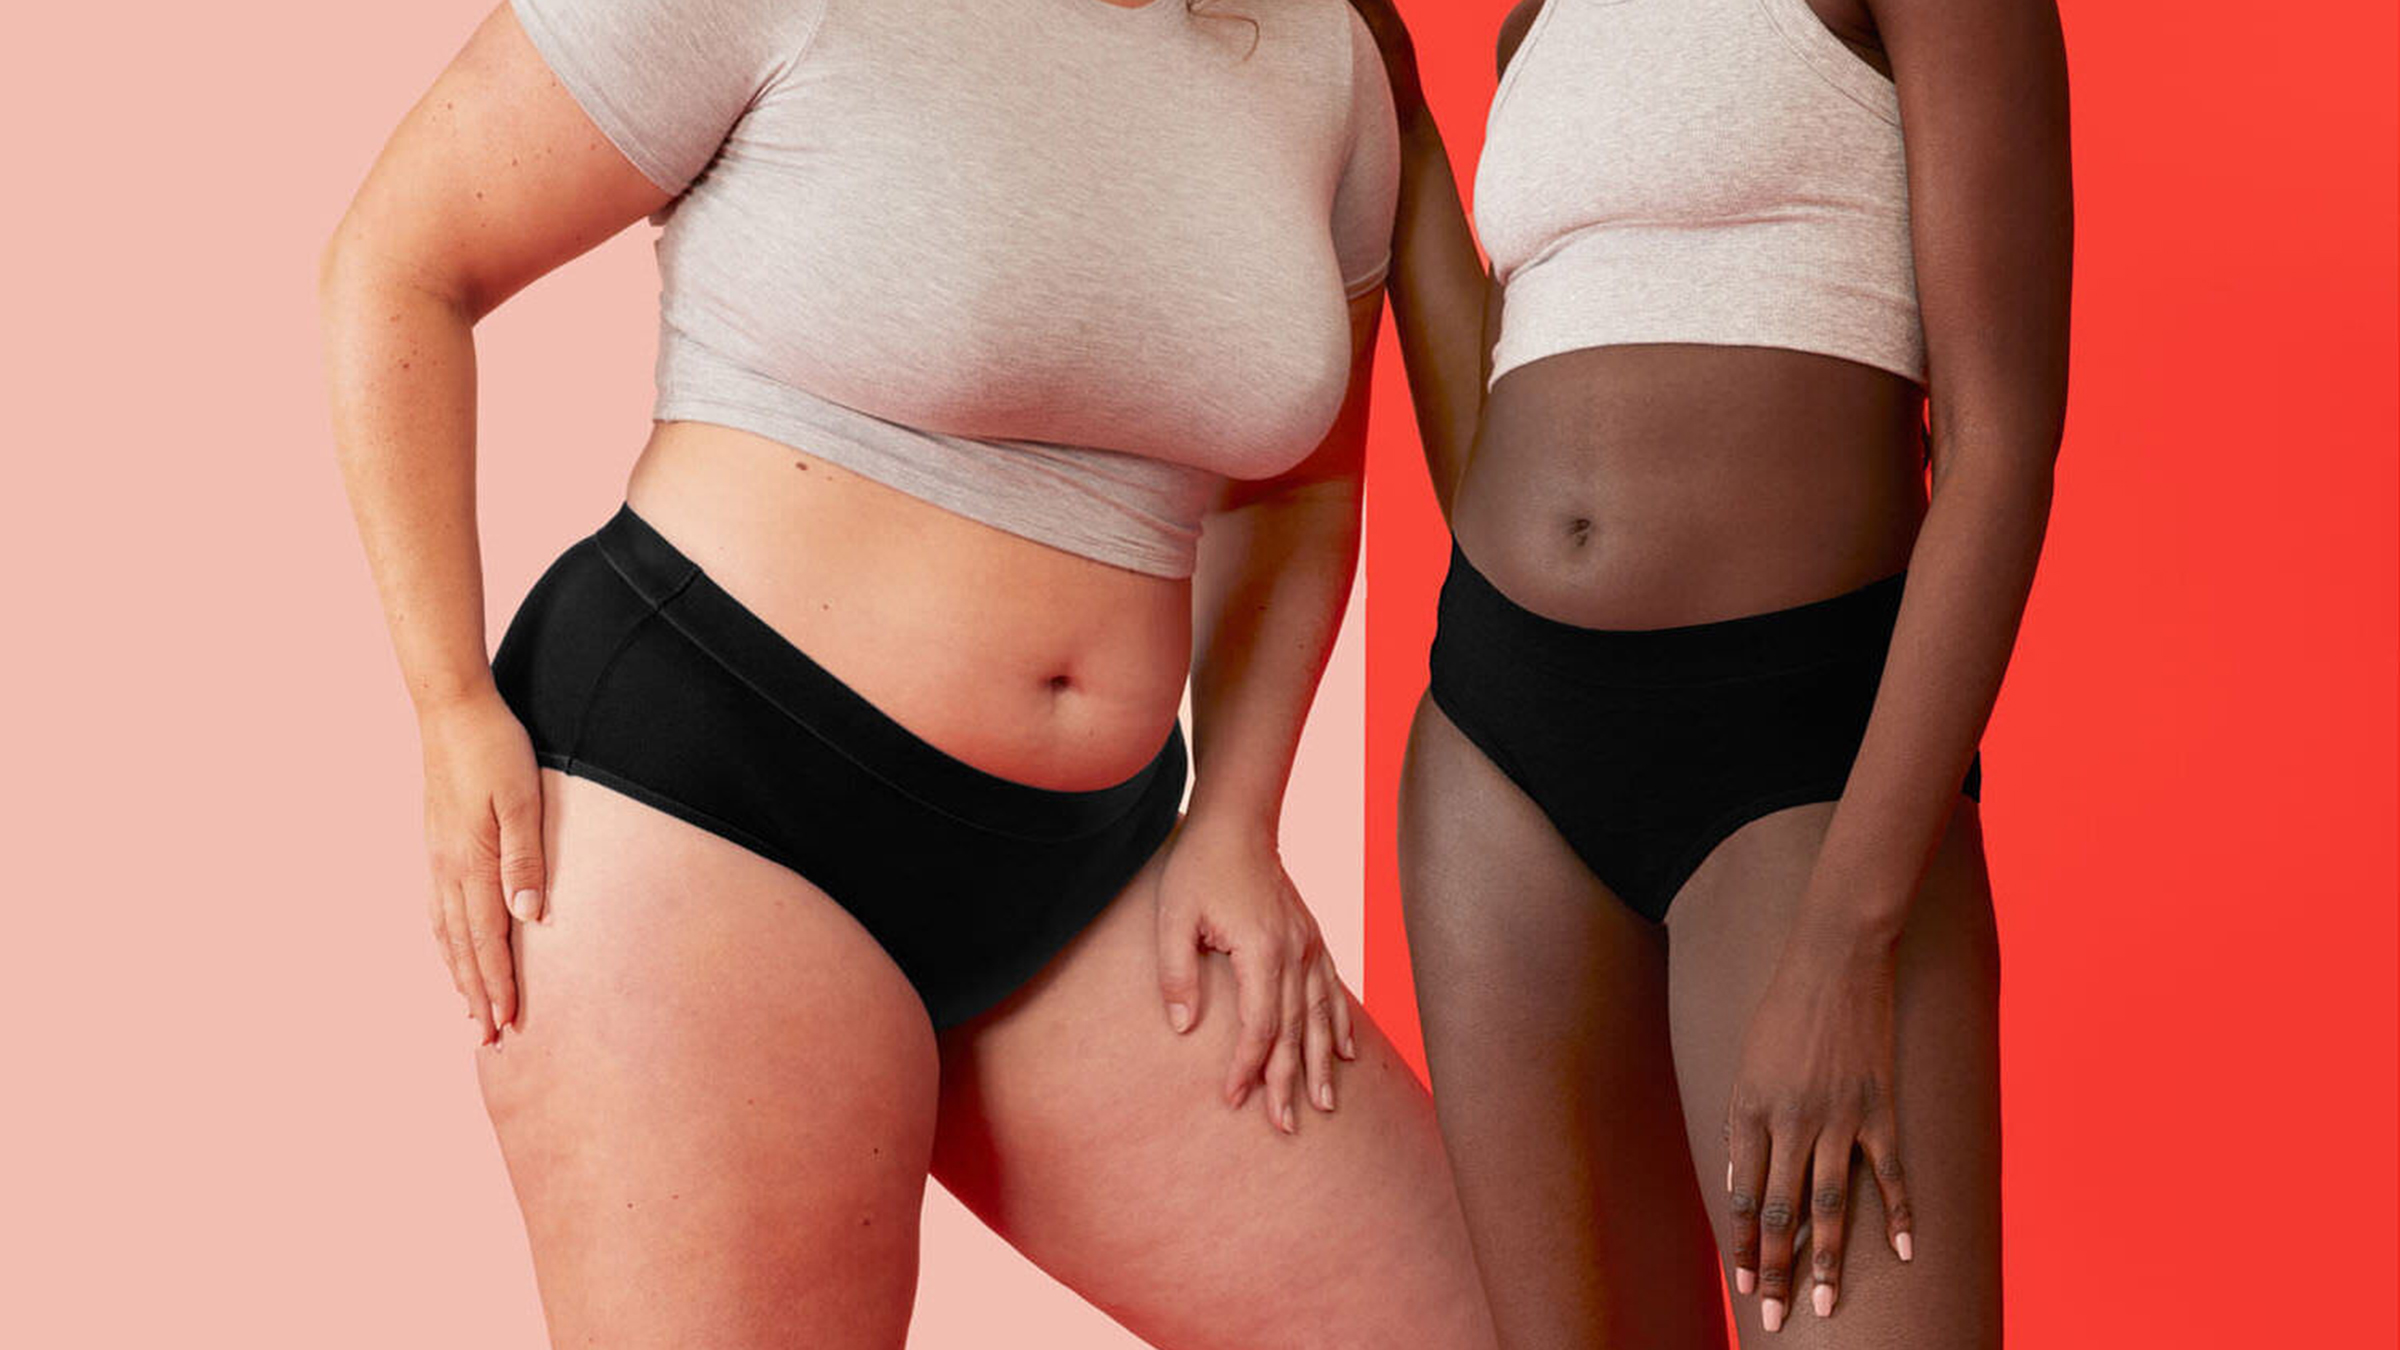 Thinx period underwear was supposed to be 'non-toxic'. Now